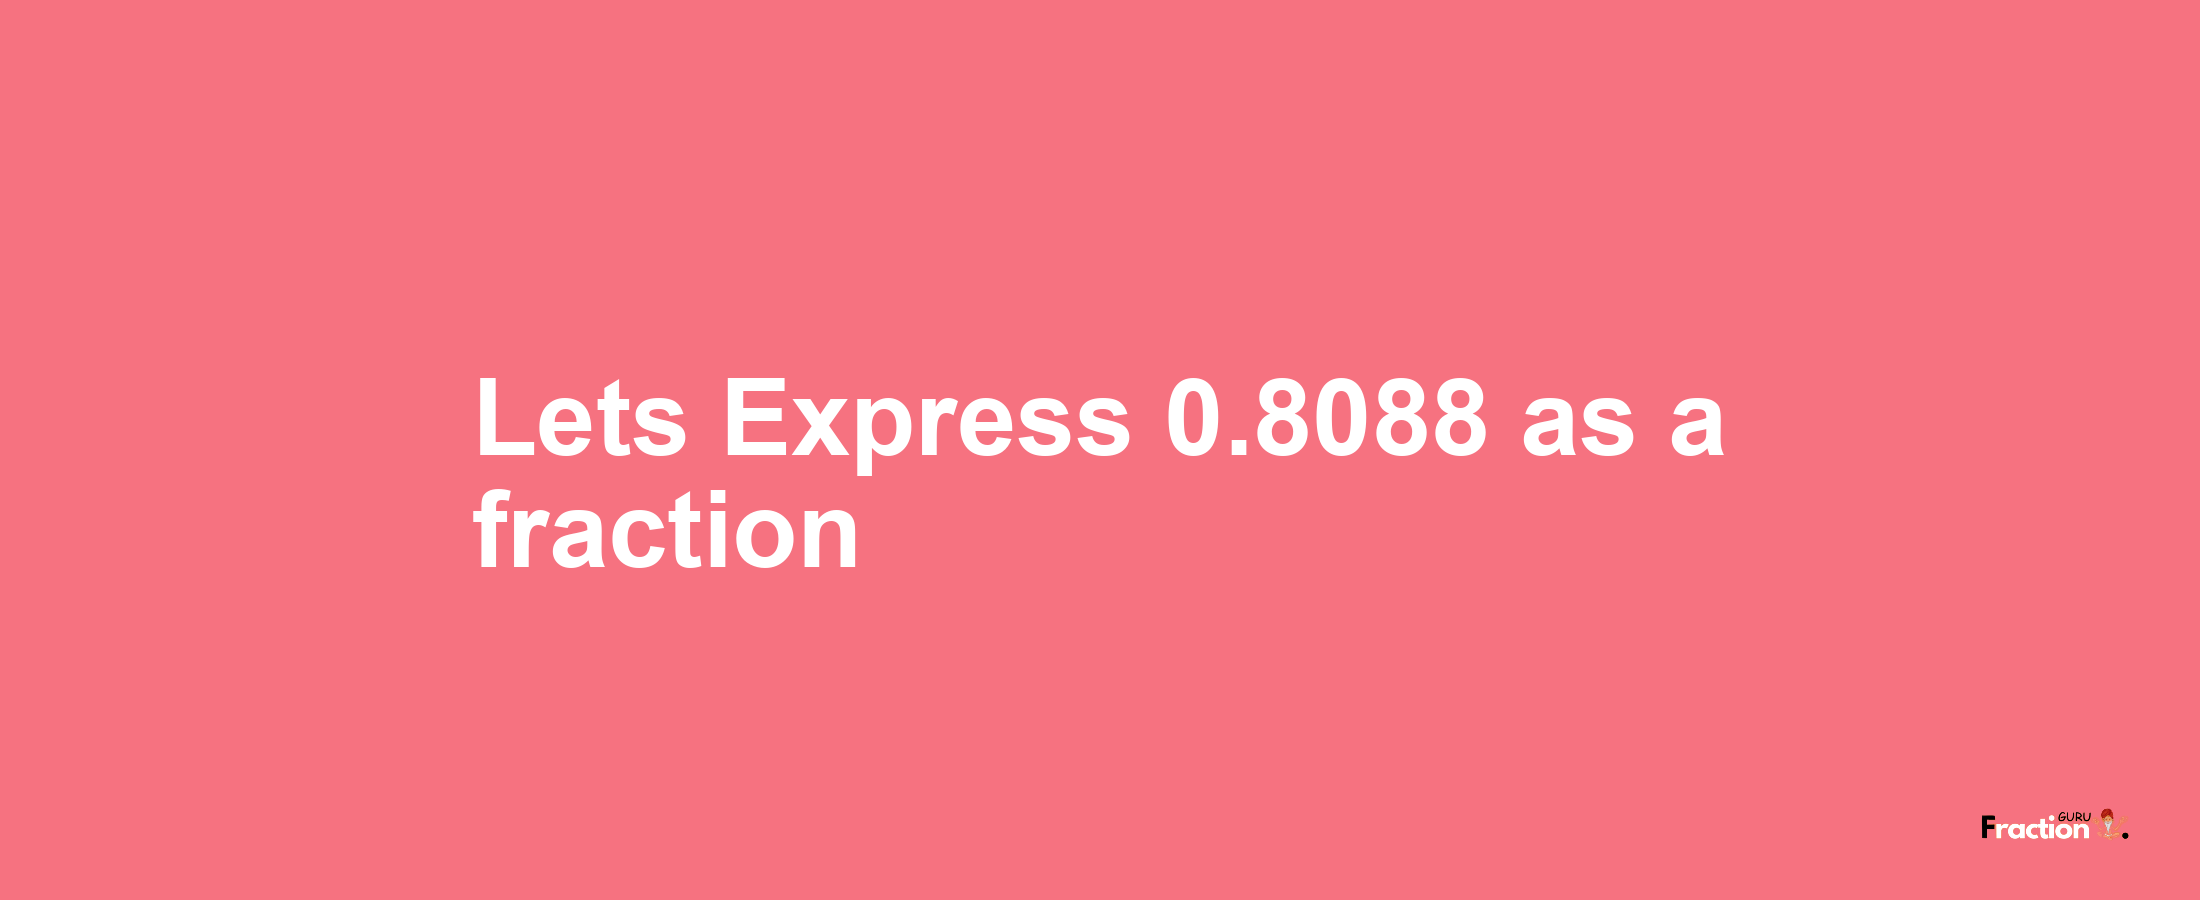 Lets Express 0.8088 as afraction